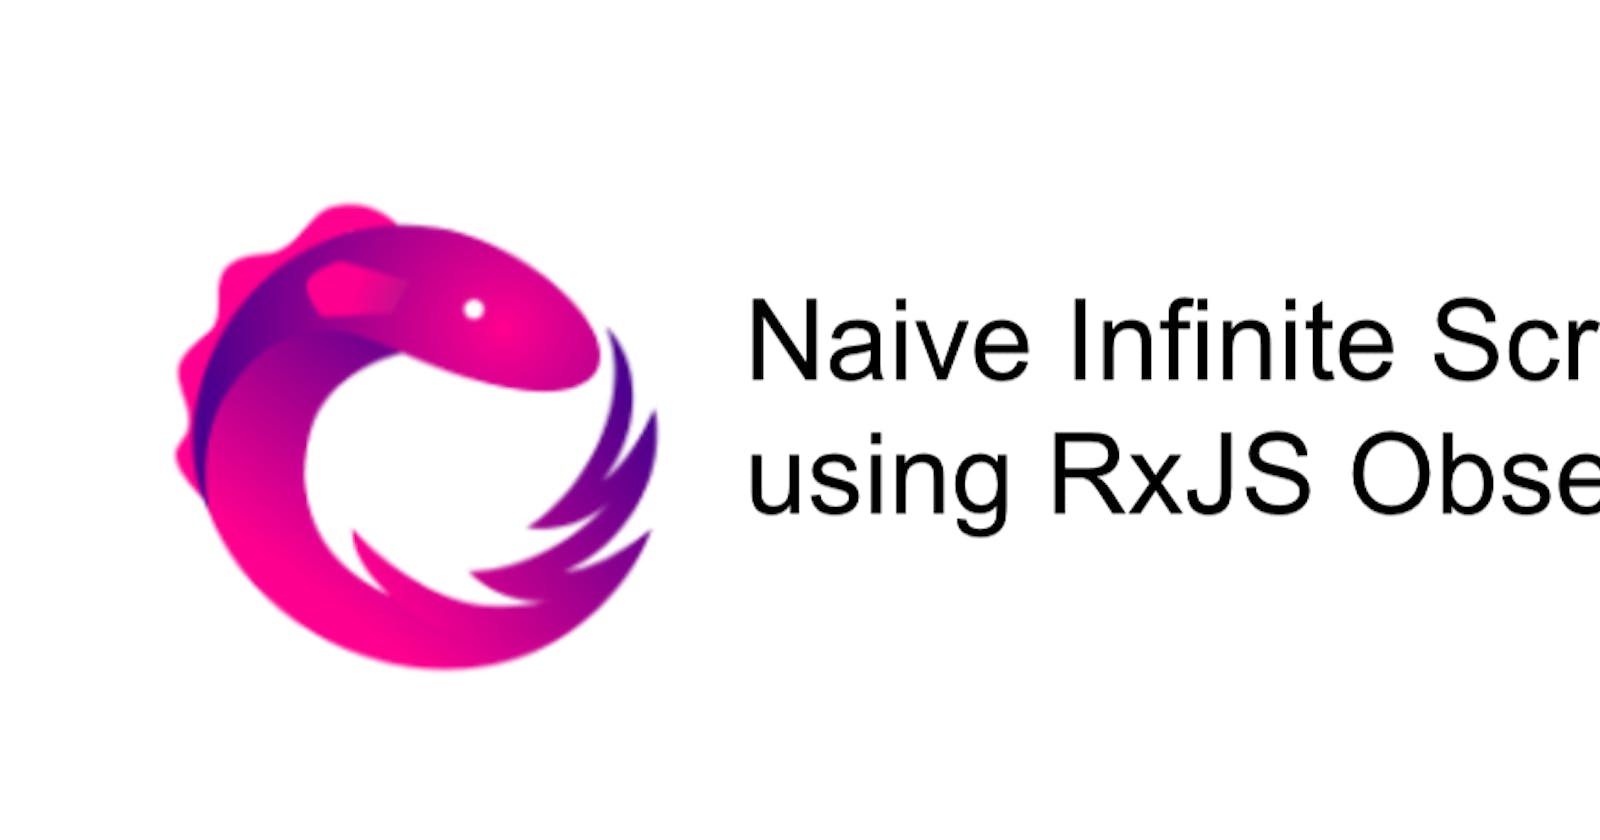 Naive Infinite scroll in Reactive Programming using RxJS Observables